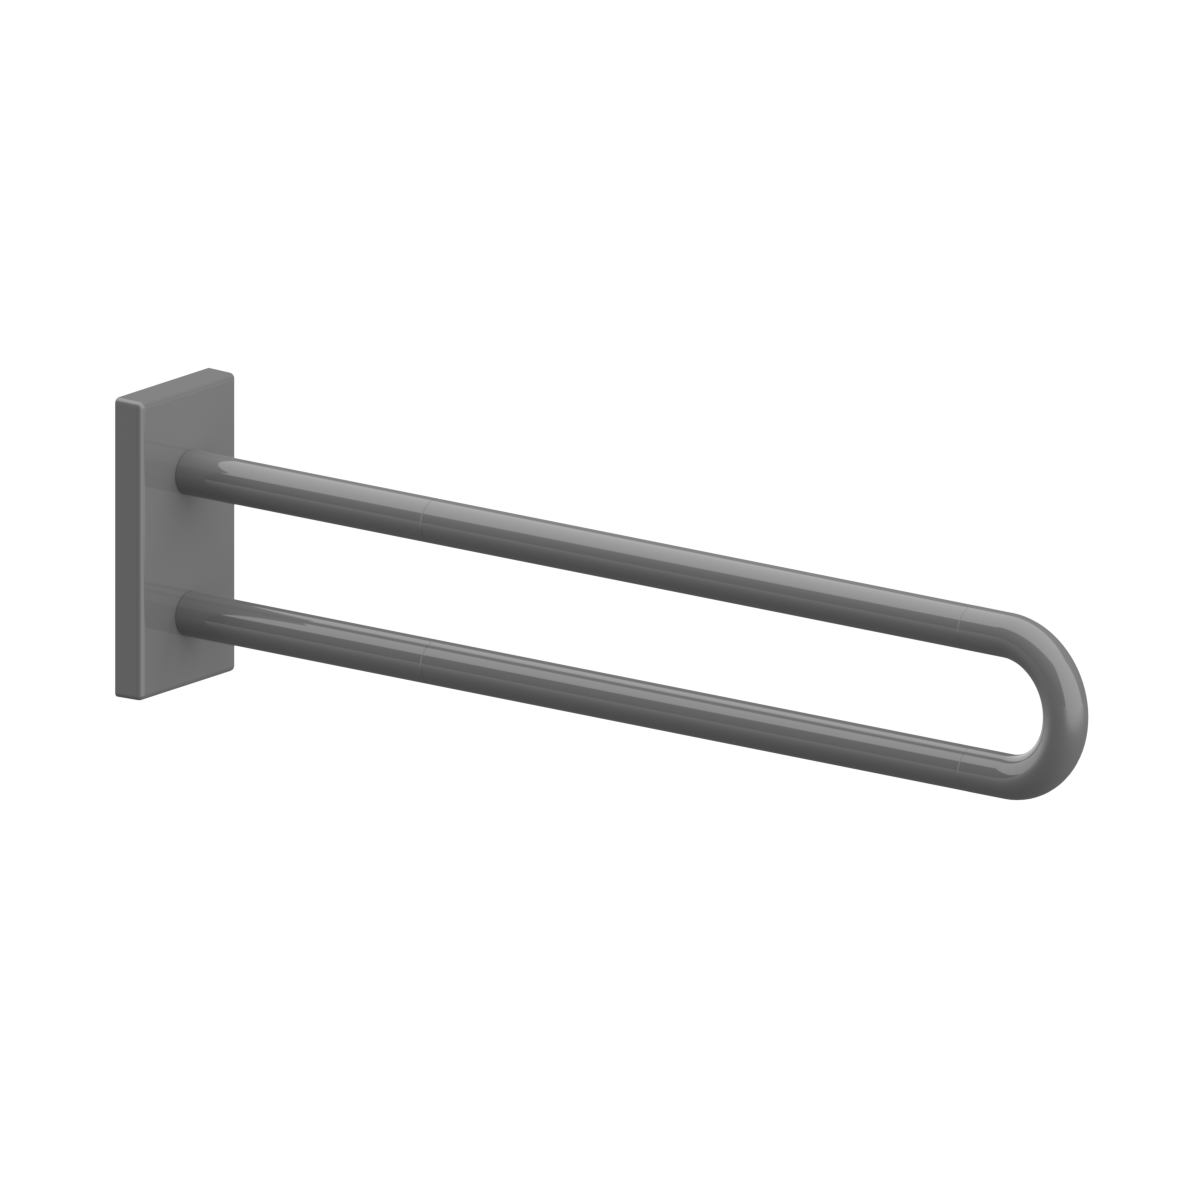 Nylon Care Wall support rail vario, with base plate, left and right, L = 850 mm, Dark grey